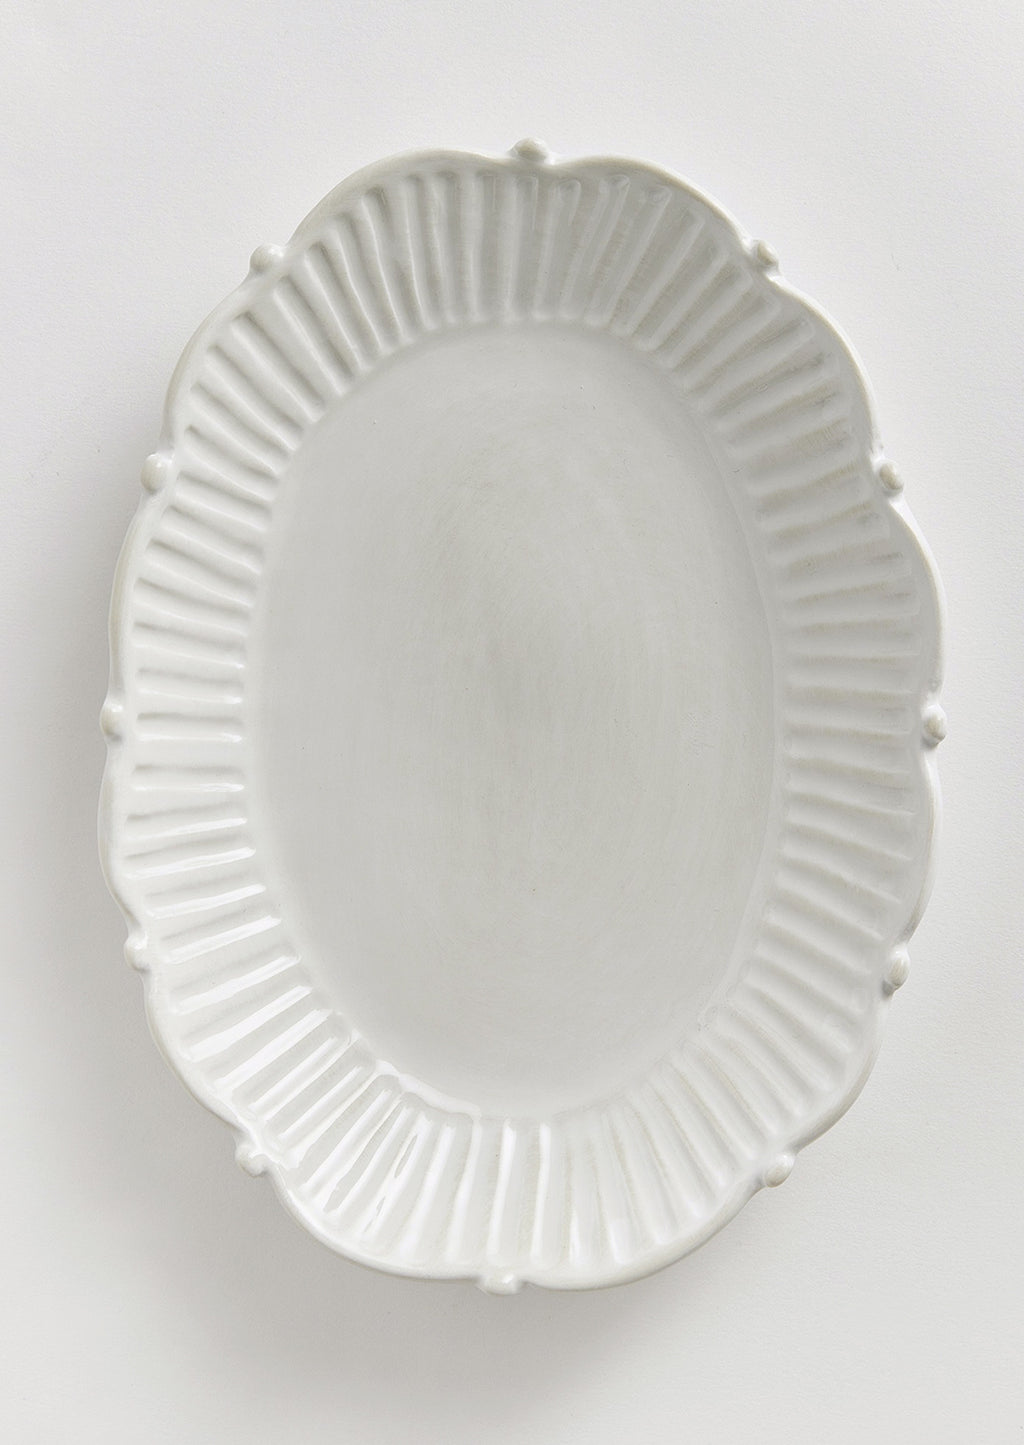 1: An oval shaped tray with ruffled and pleated border with ball detail around edges.